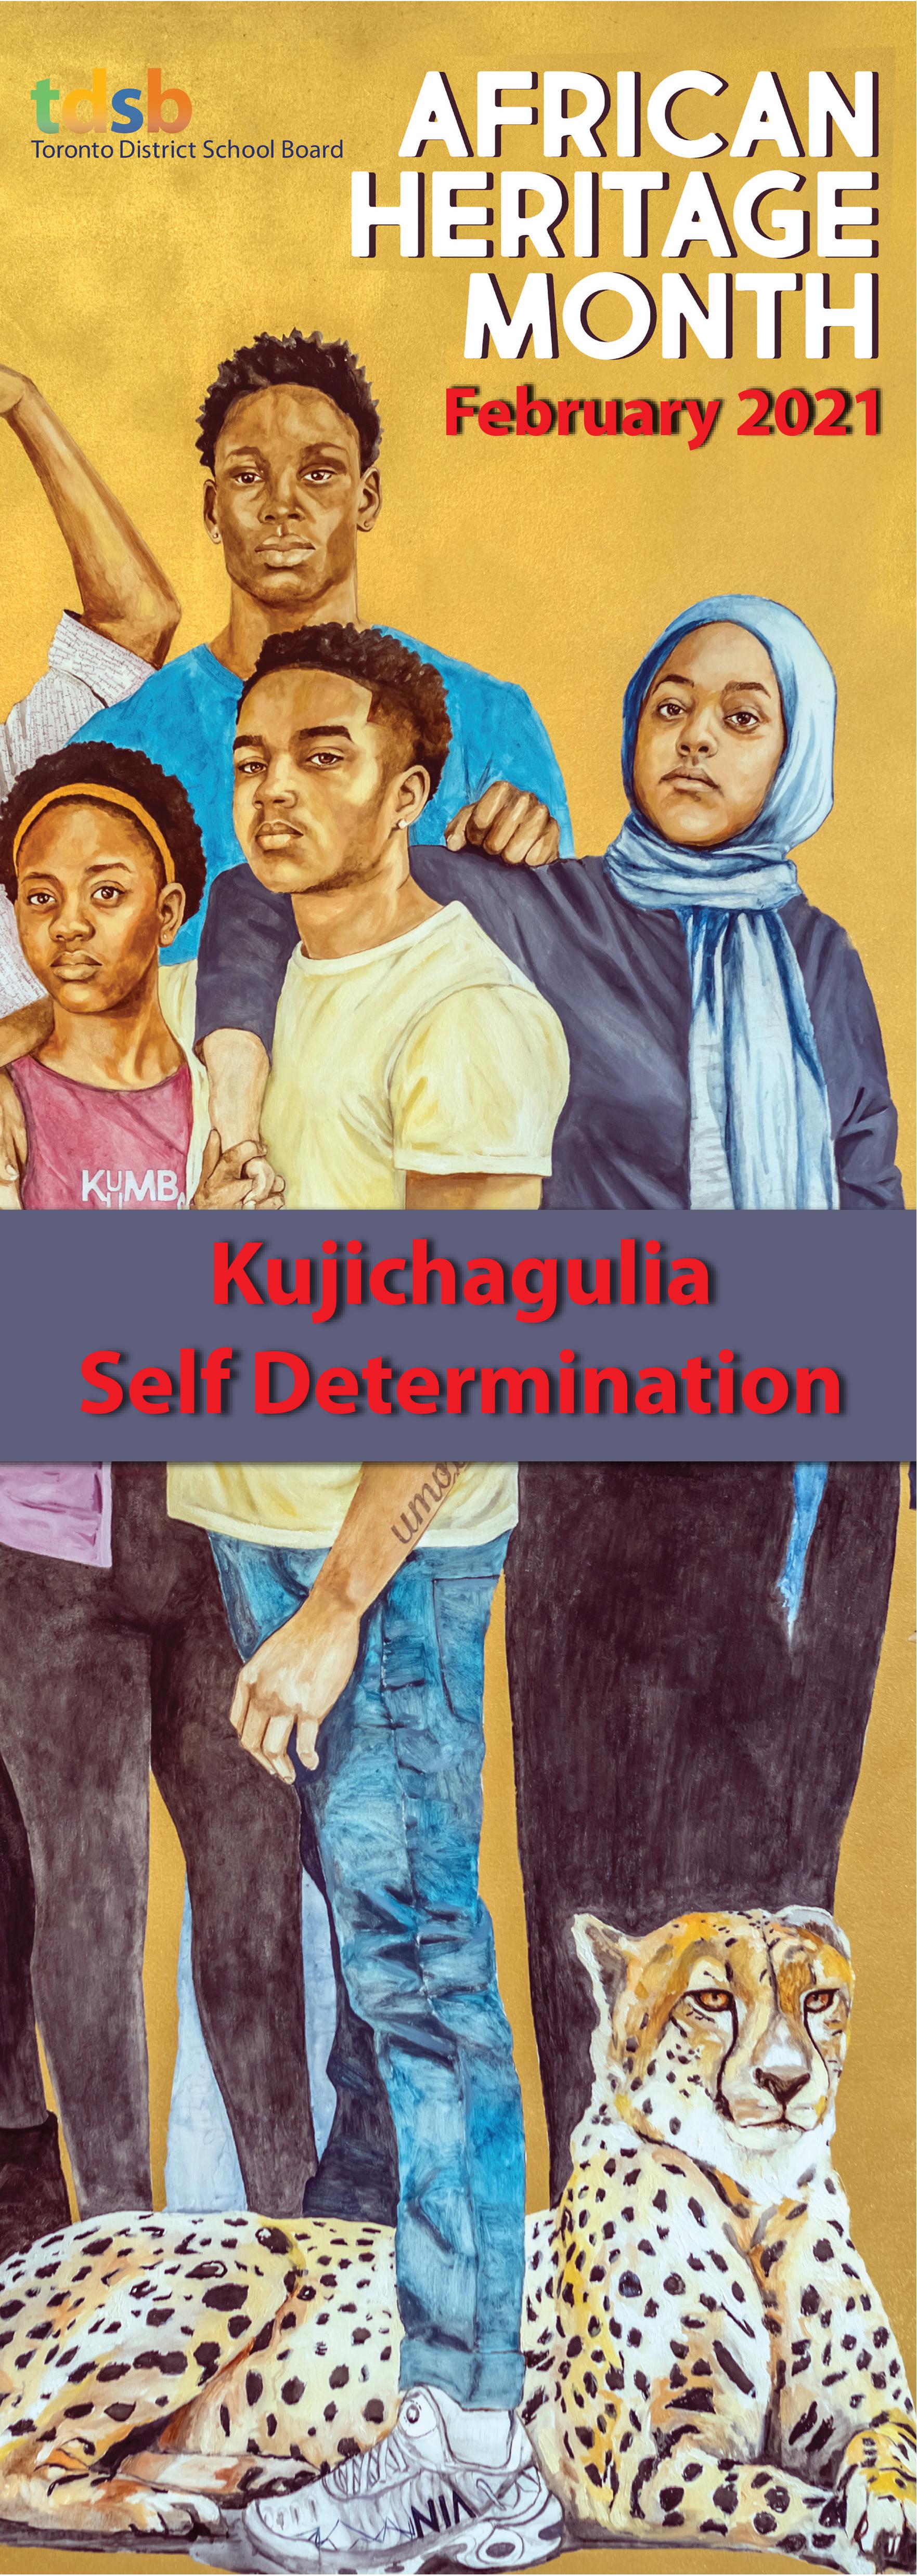 The artwork for the poster was created by students from Downsview Secondary School in 2020 under the leadership of their teacher, Matthew Chapman.  Five principles of Kwanzaa are presented in this painting including the theme for 2021, Kujichagulia (Self Determination), which can be found in the fabric of one of the shirts.